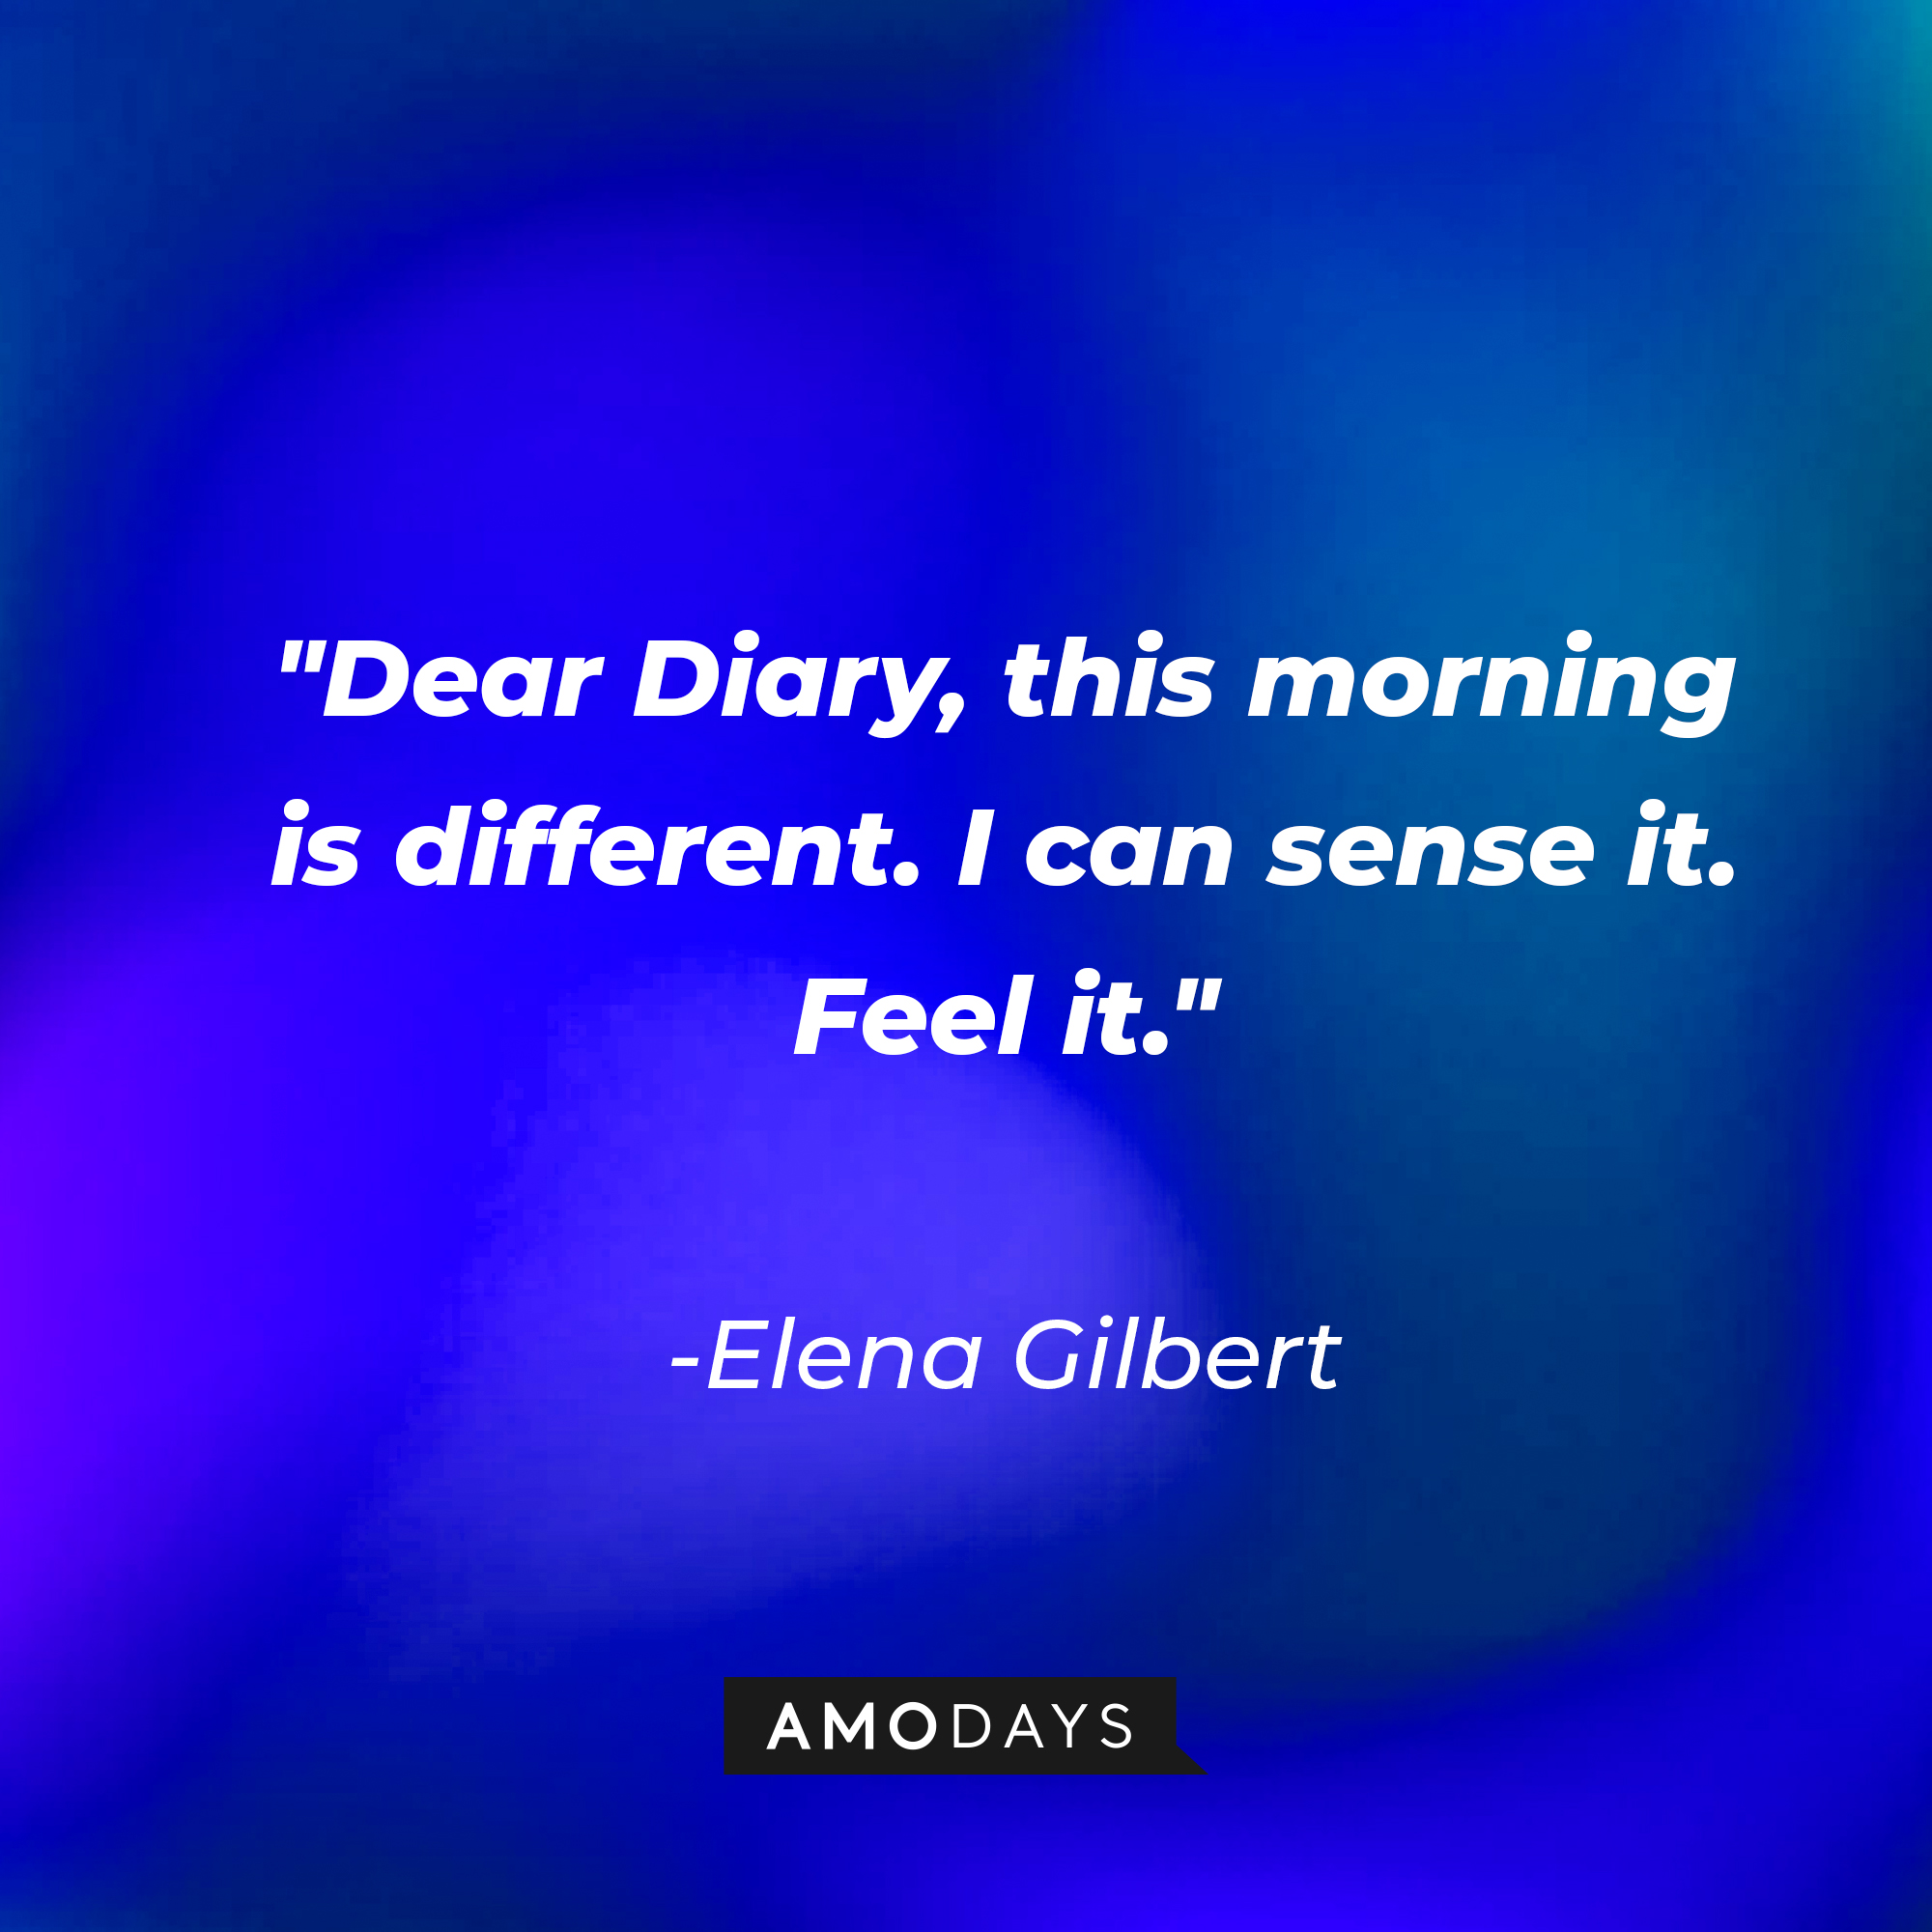 Elena Gilbert's quote: "Dear Diary, this morning is different. I can sense it. Feel it." | Image: AmoDays